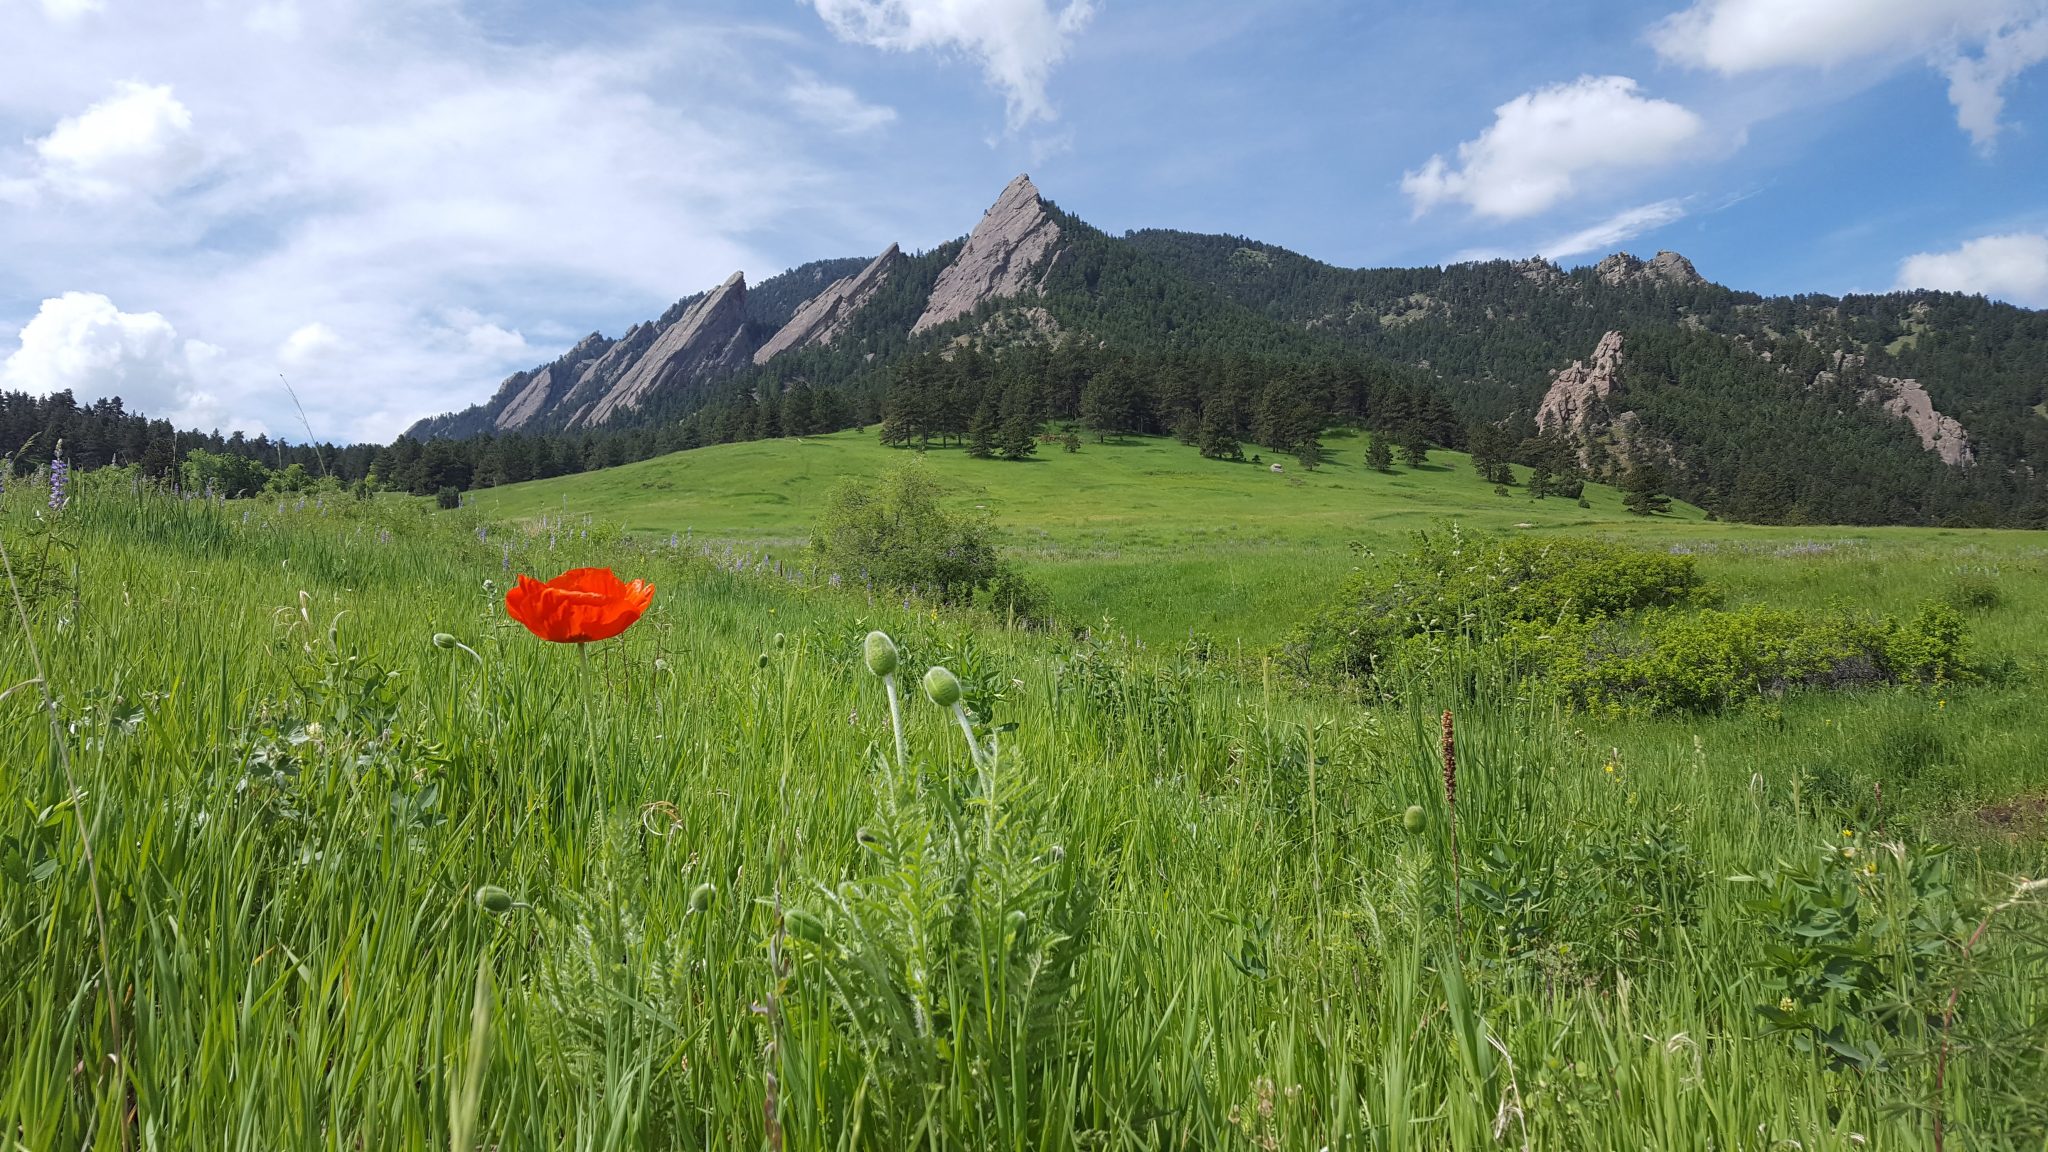 The Flatirons from across a field or green with a red flower in the foreground.